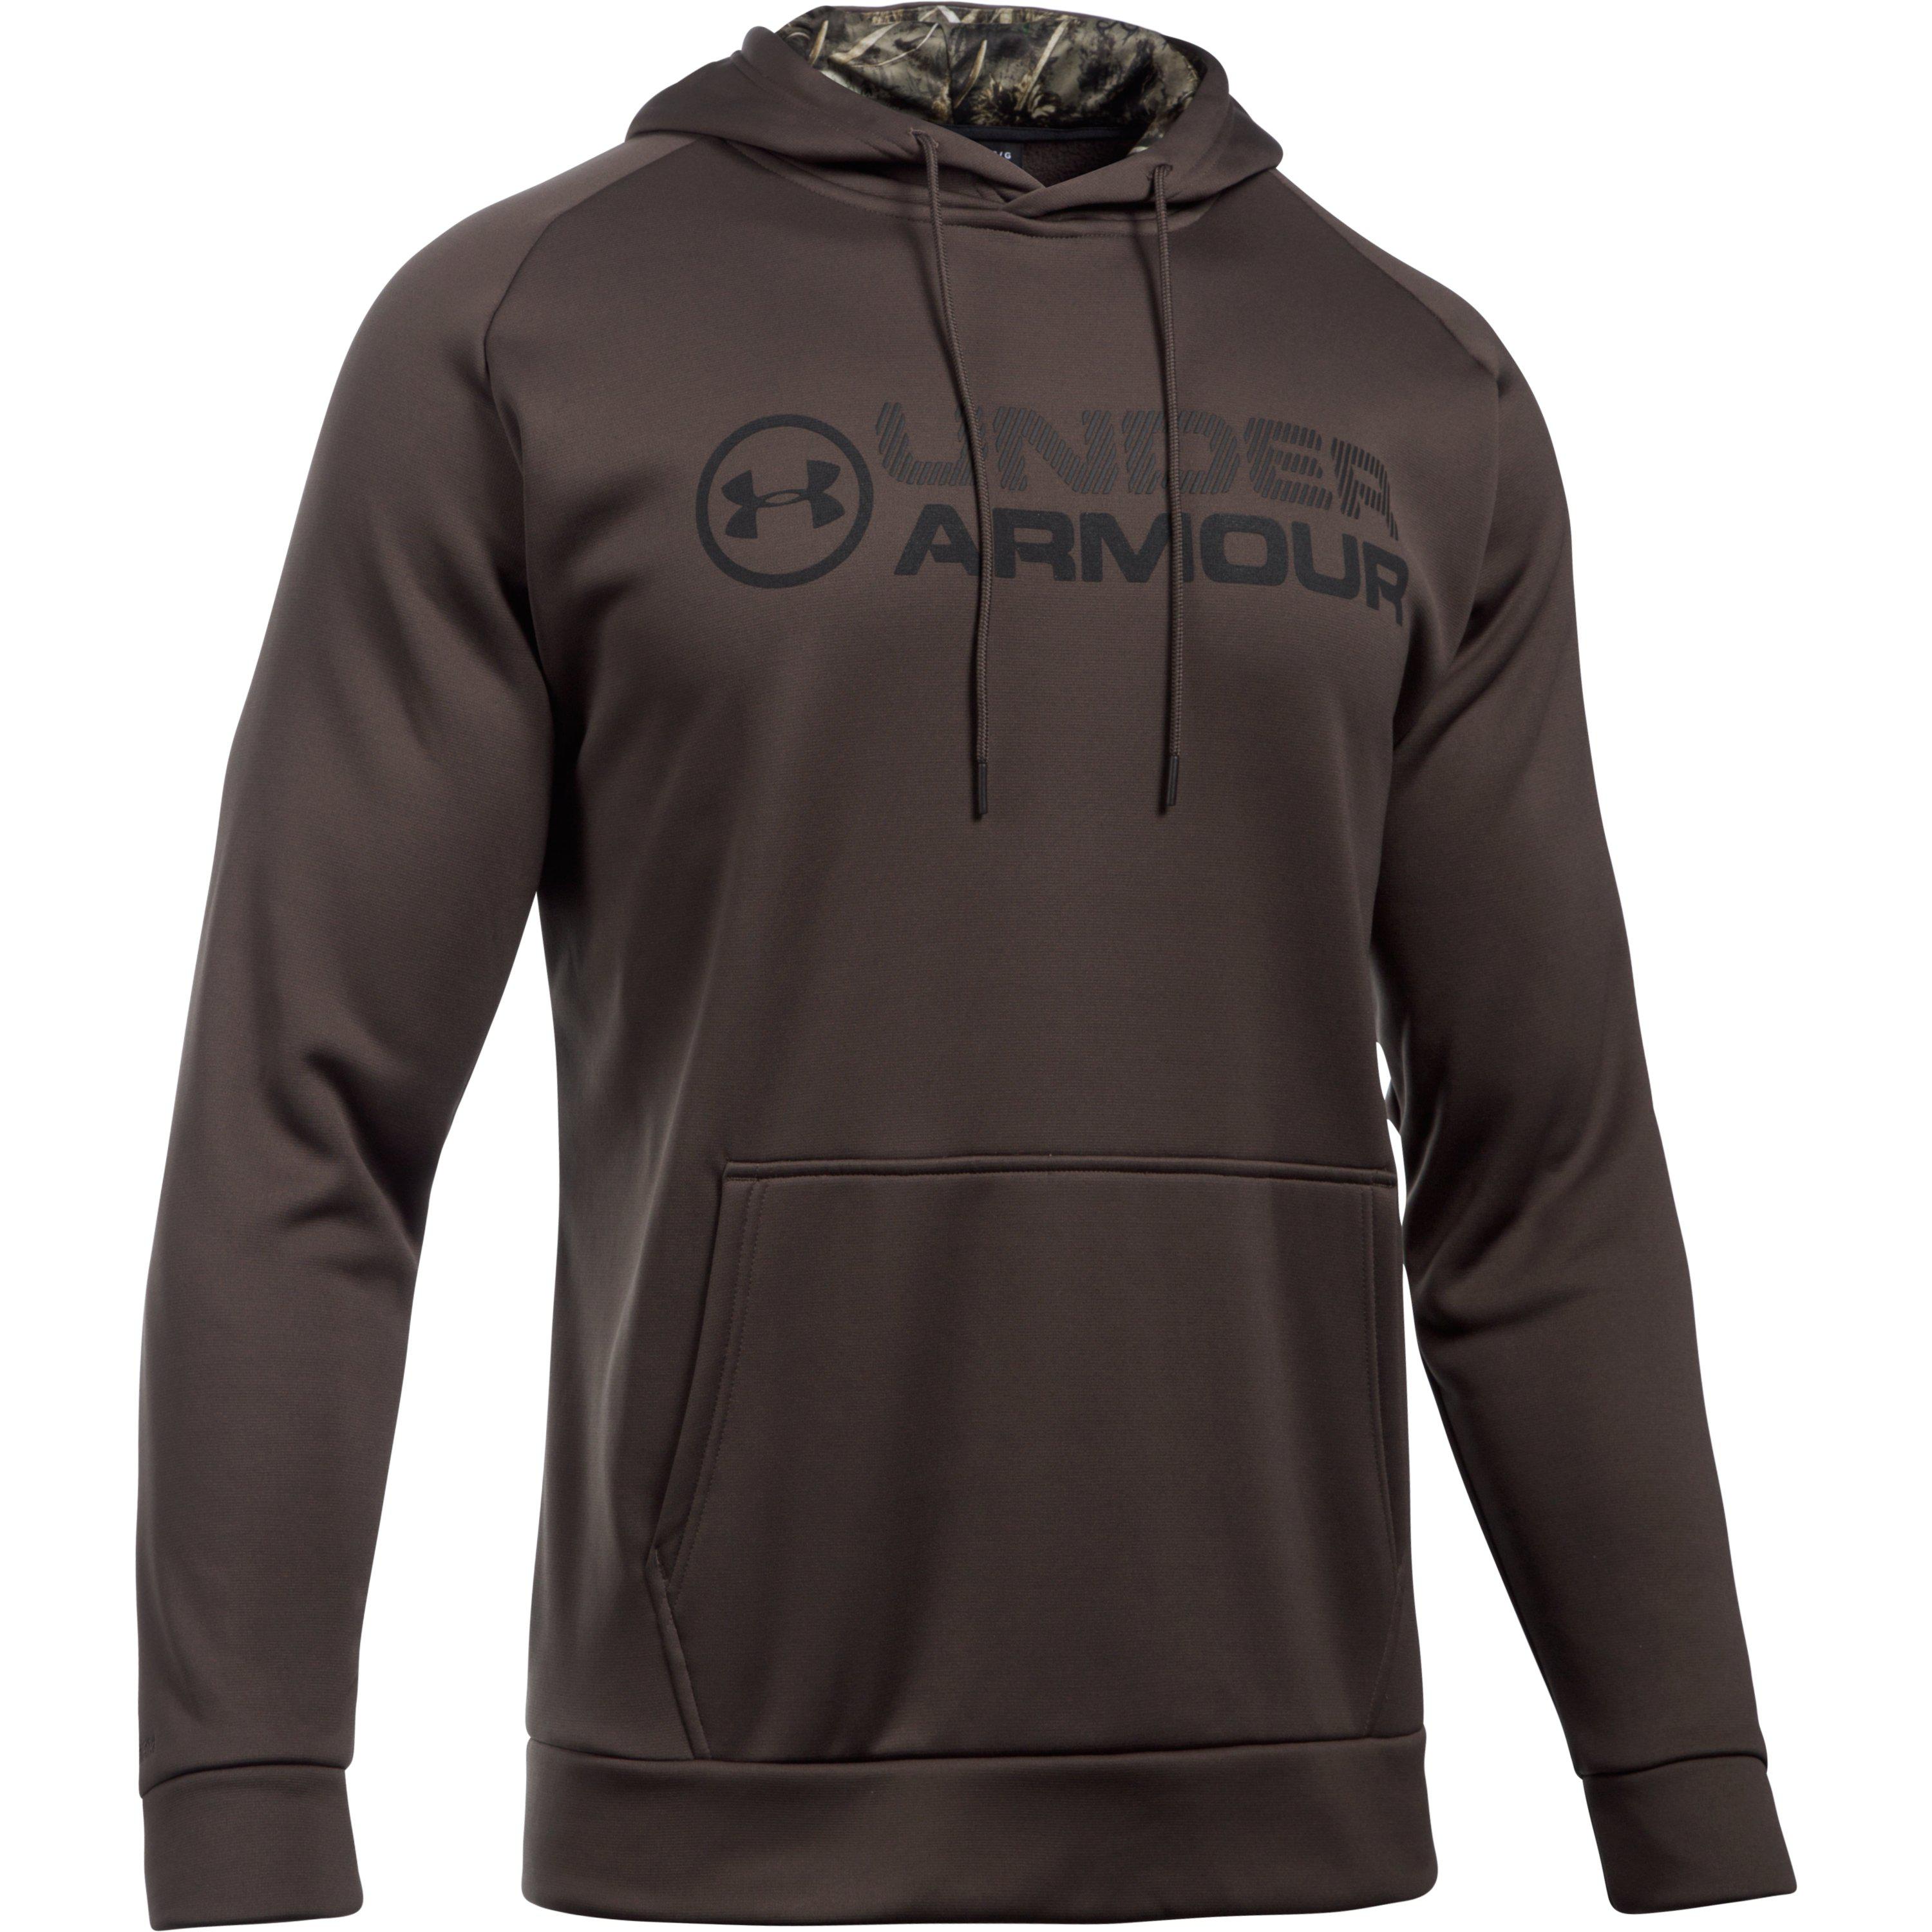 Under Armour Men's Ua Storm Armour® Fleece Stacked Hoodie in Brown for ...